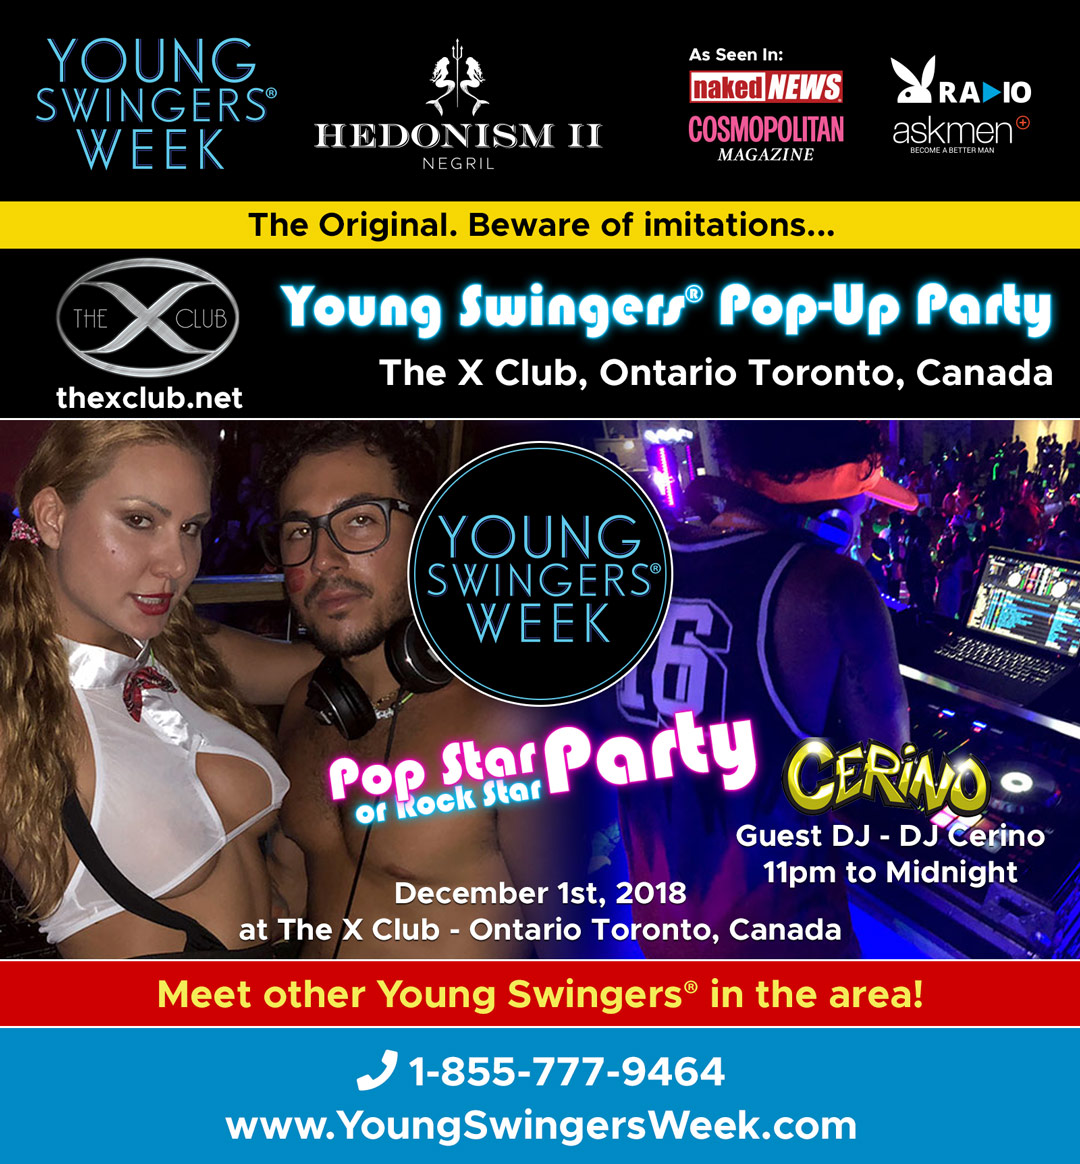 Young Swingers® Pop-Up Party at The X Club, Canada Pop Star Night